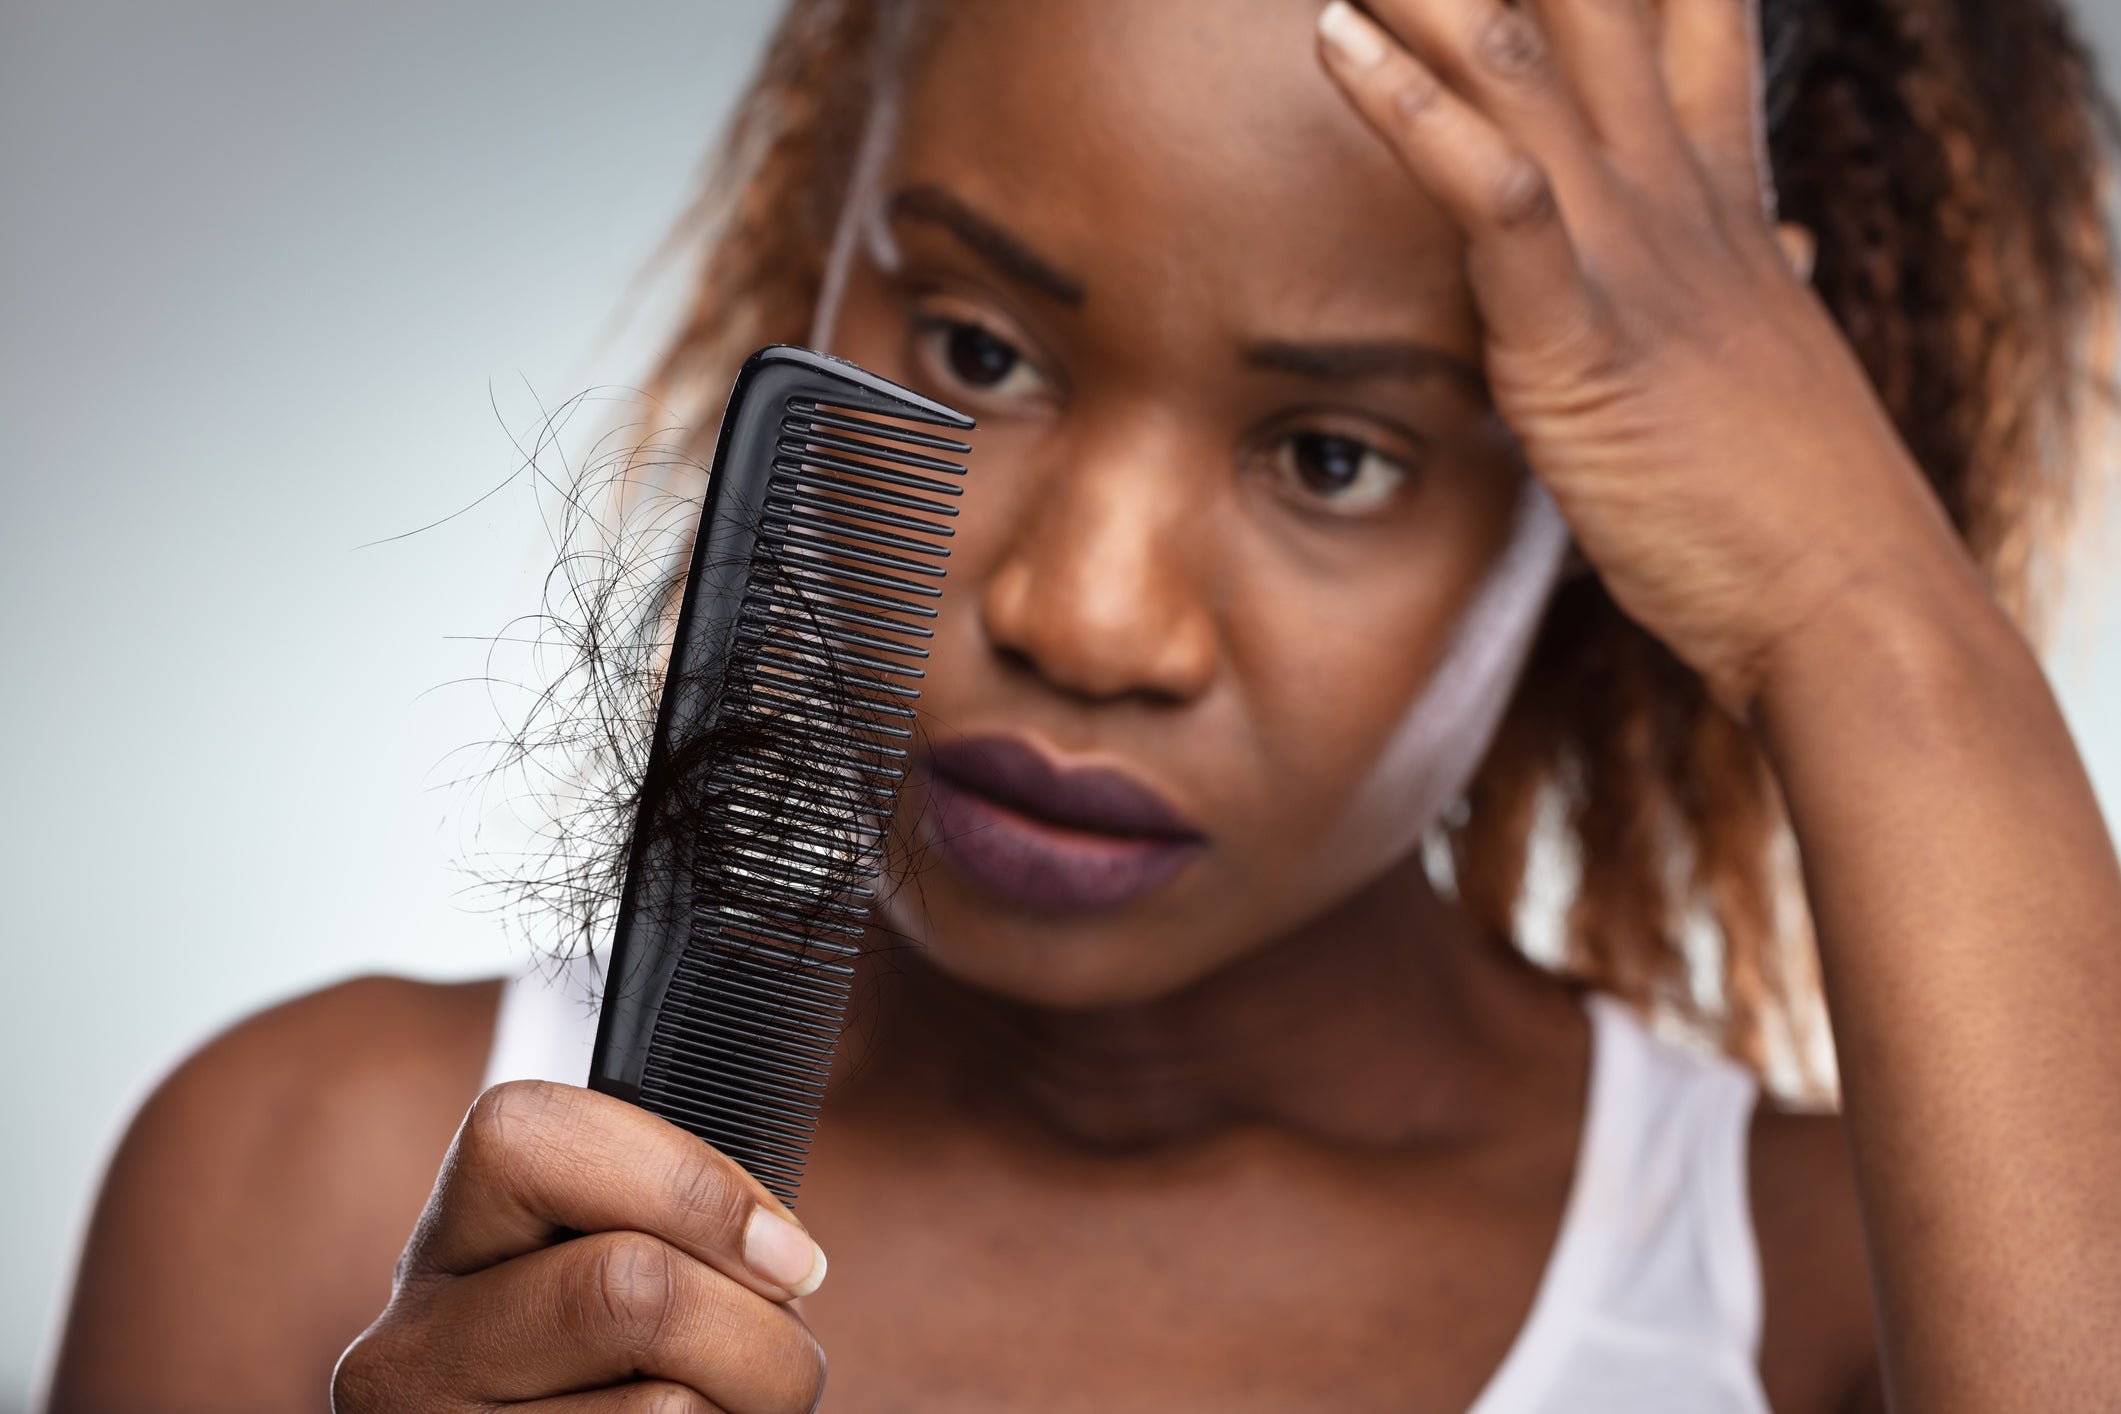 Ways Your Lifestyle Can Wreak Havoc On Your Hair